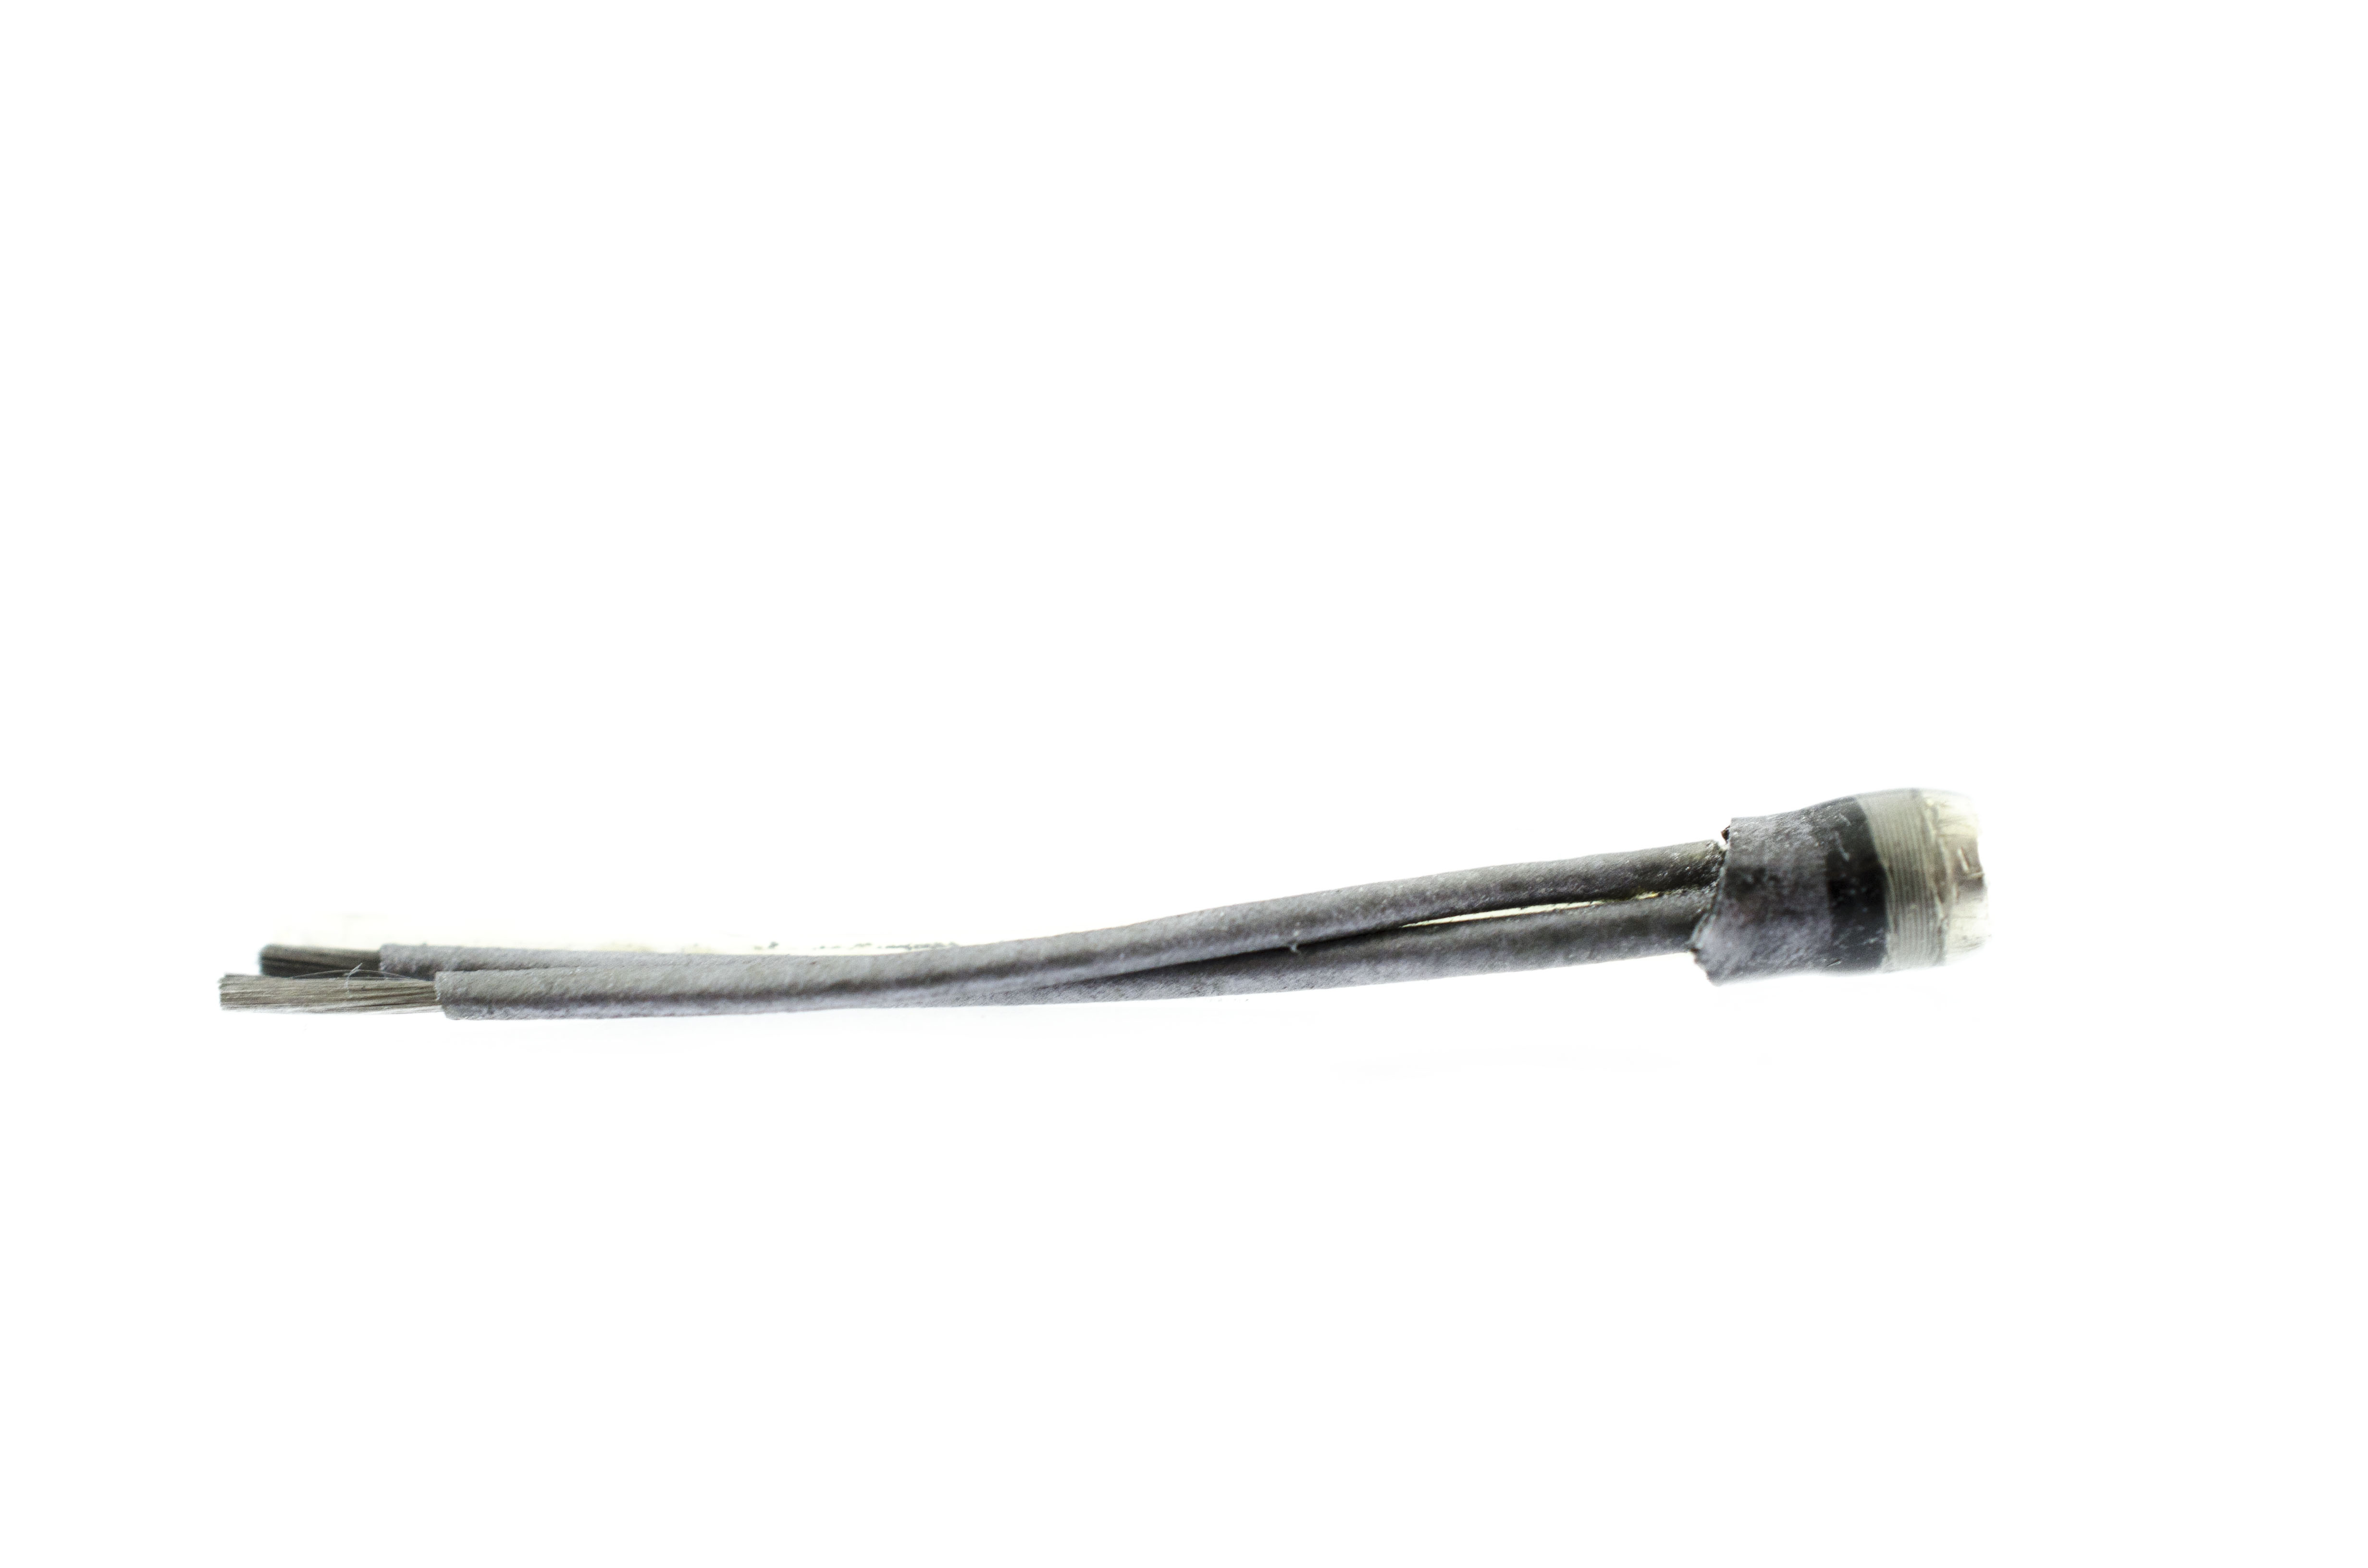 OEM Distal Tip with Lenses, C-Cover, and Objective Stack - BF-3C10